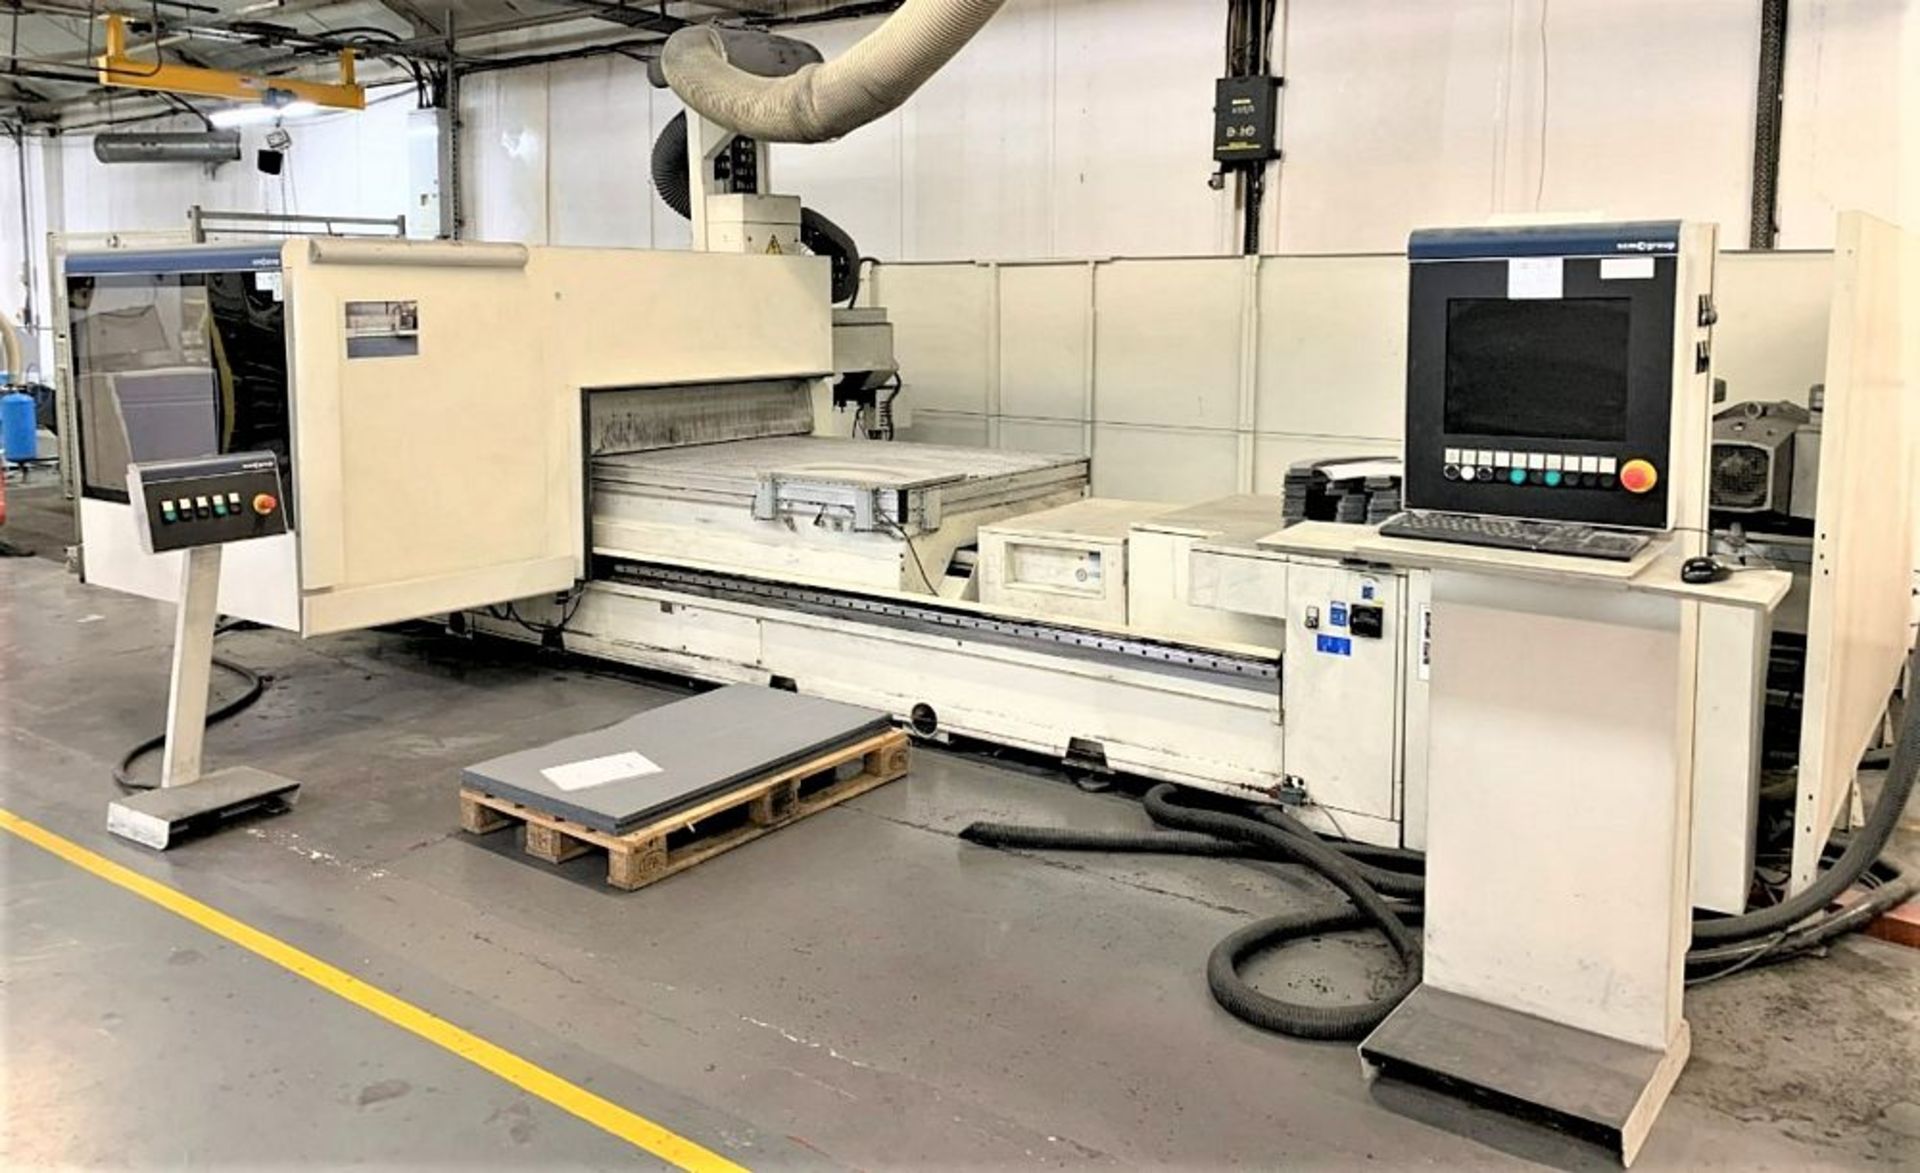 12'X54" SCM ACCORD FX-M 3-AXIS CNC ROUTER, S/N AA2/002685, NEW 2013